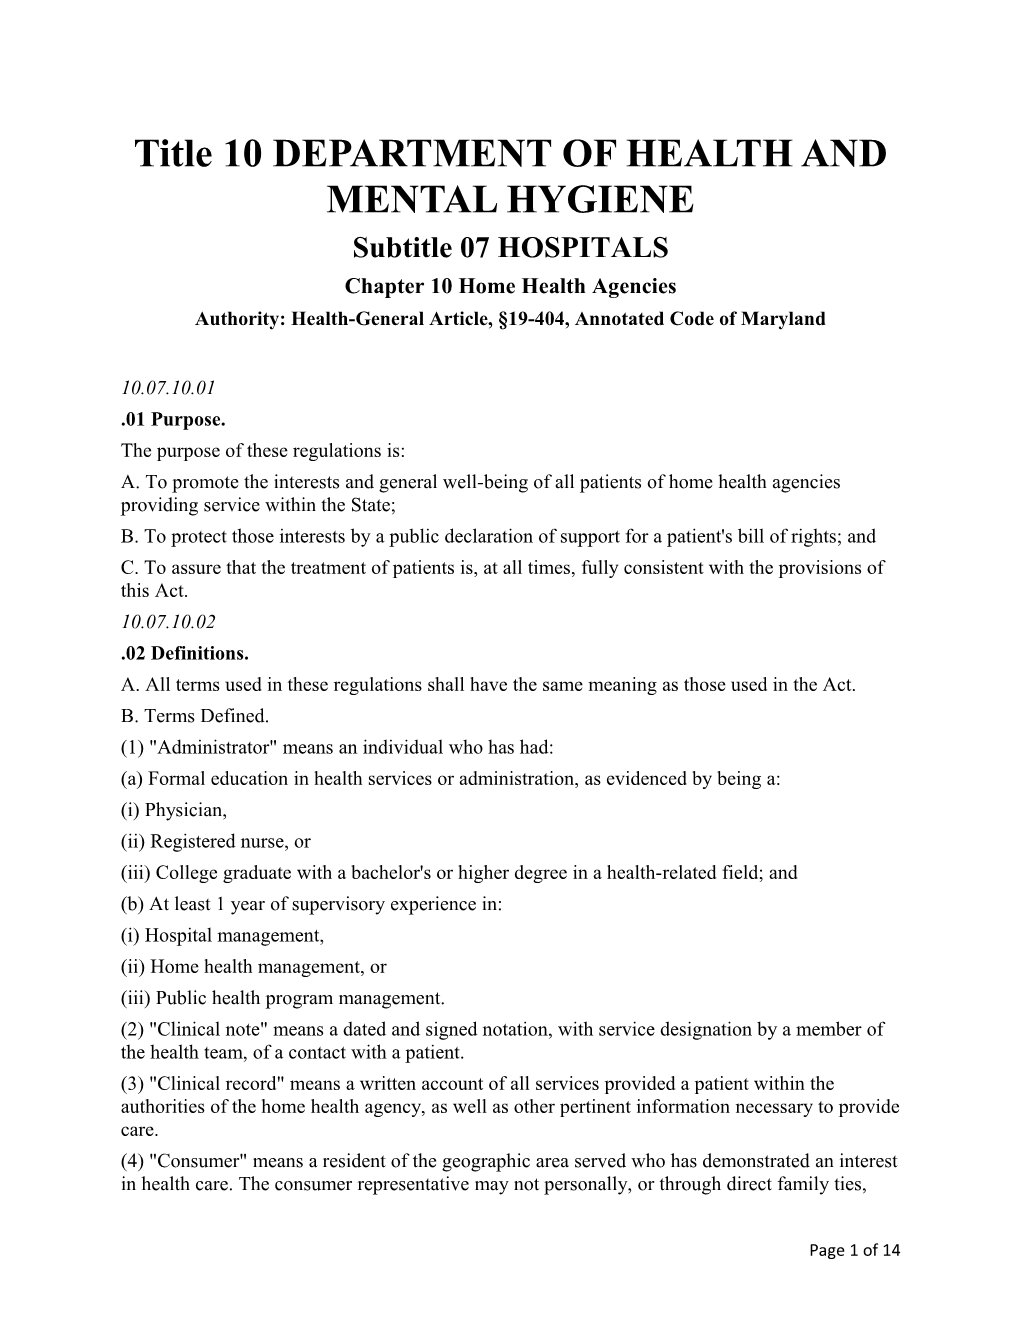 Title 10 DEPARTMENT of HEALTH and MENTAL HYGIENE